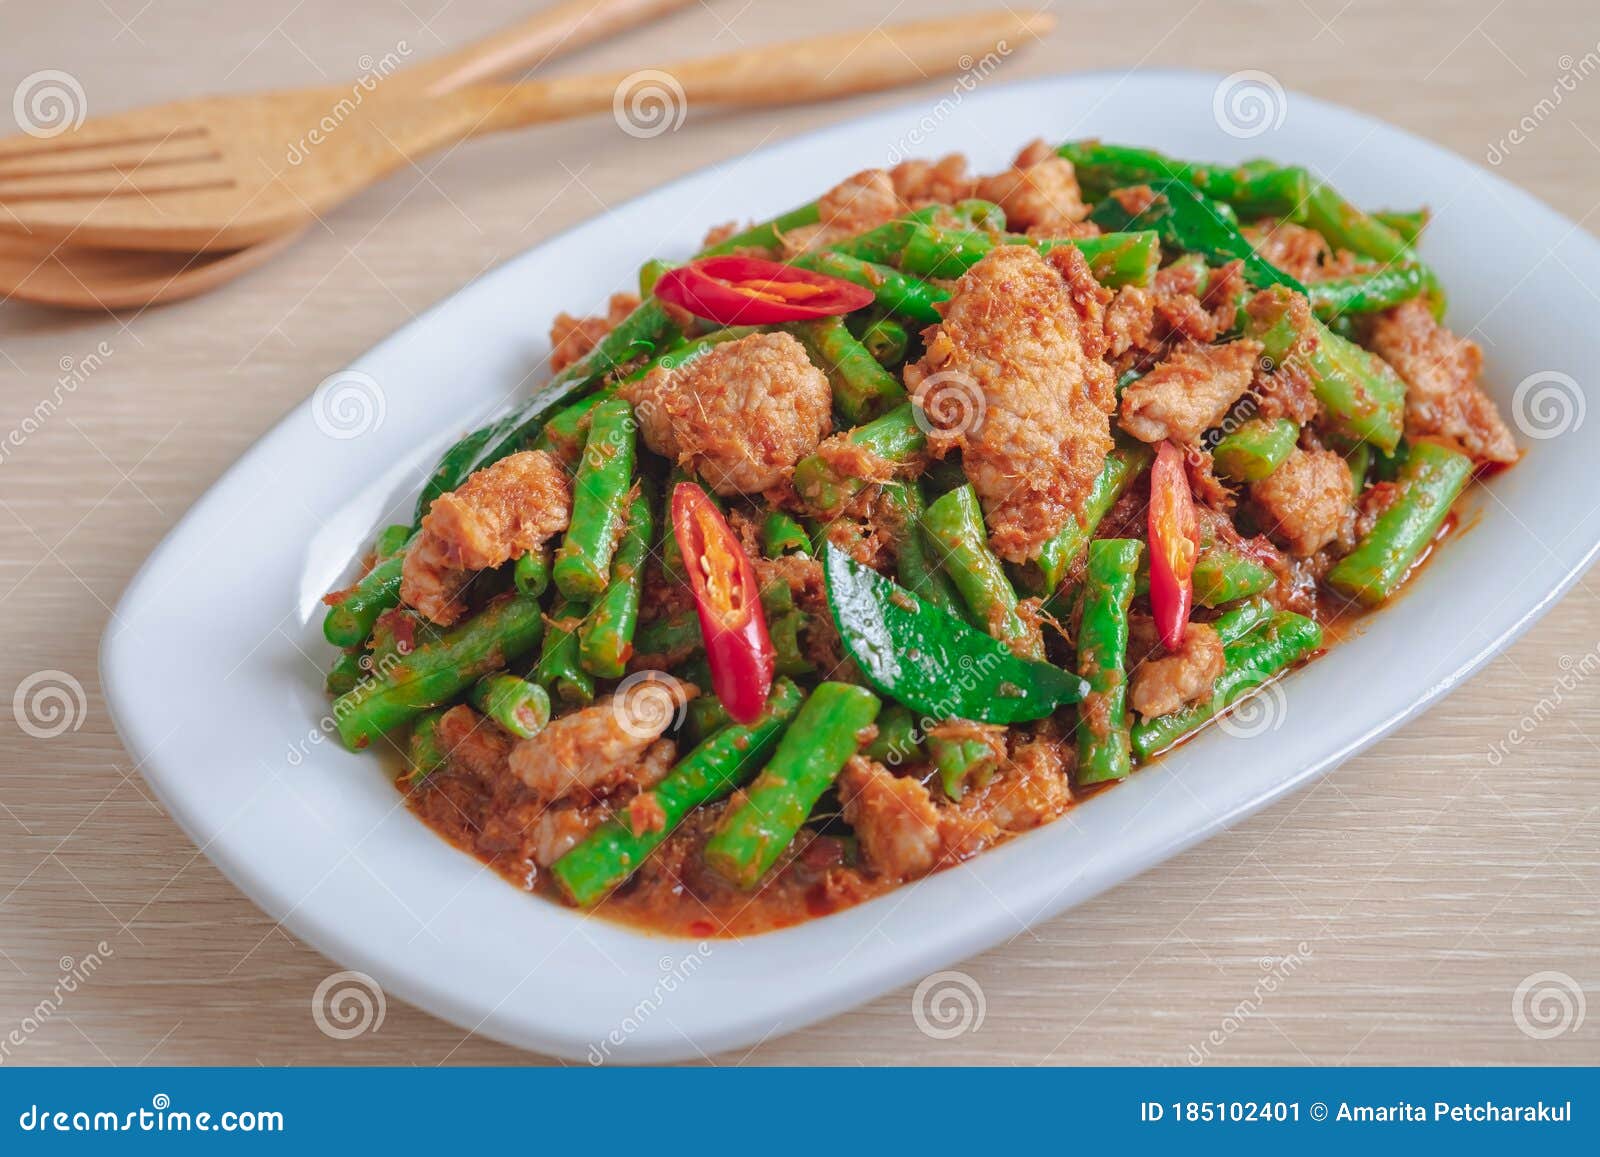 stir fried pork with yard long bean and red curry paste, thai food